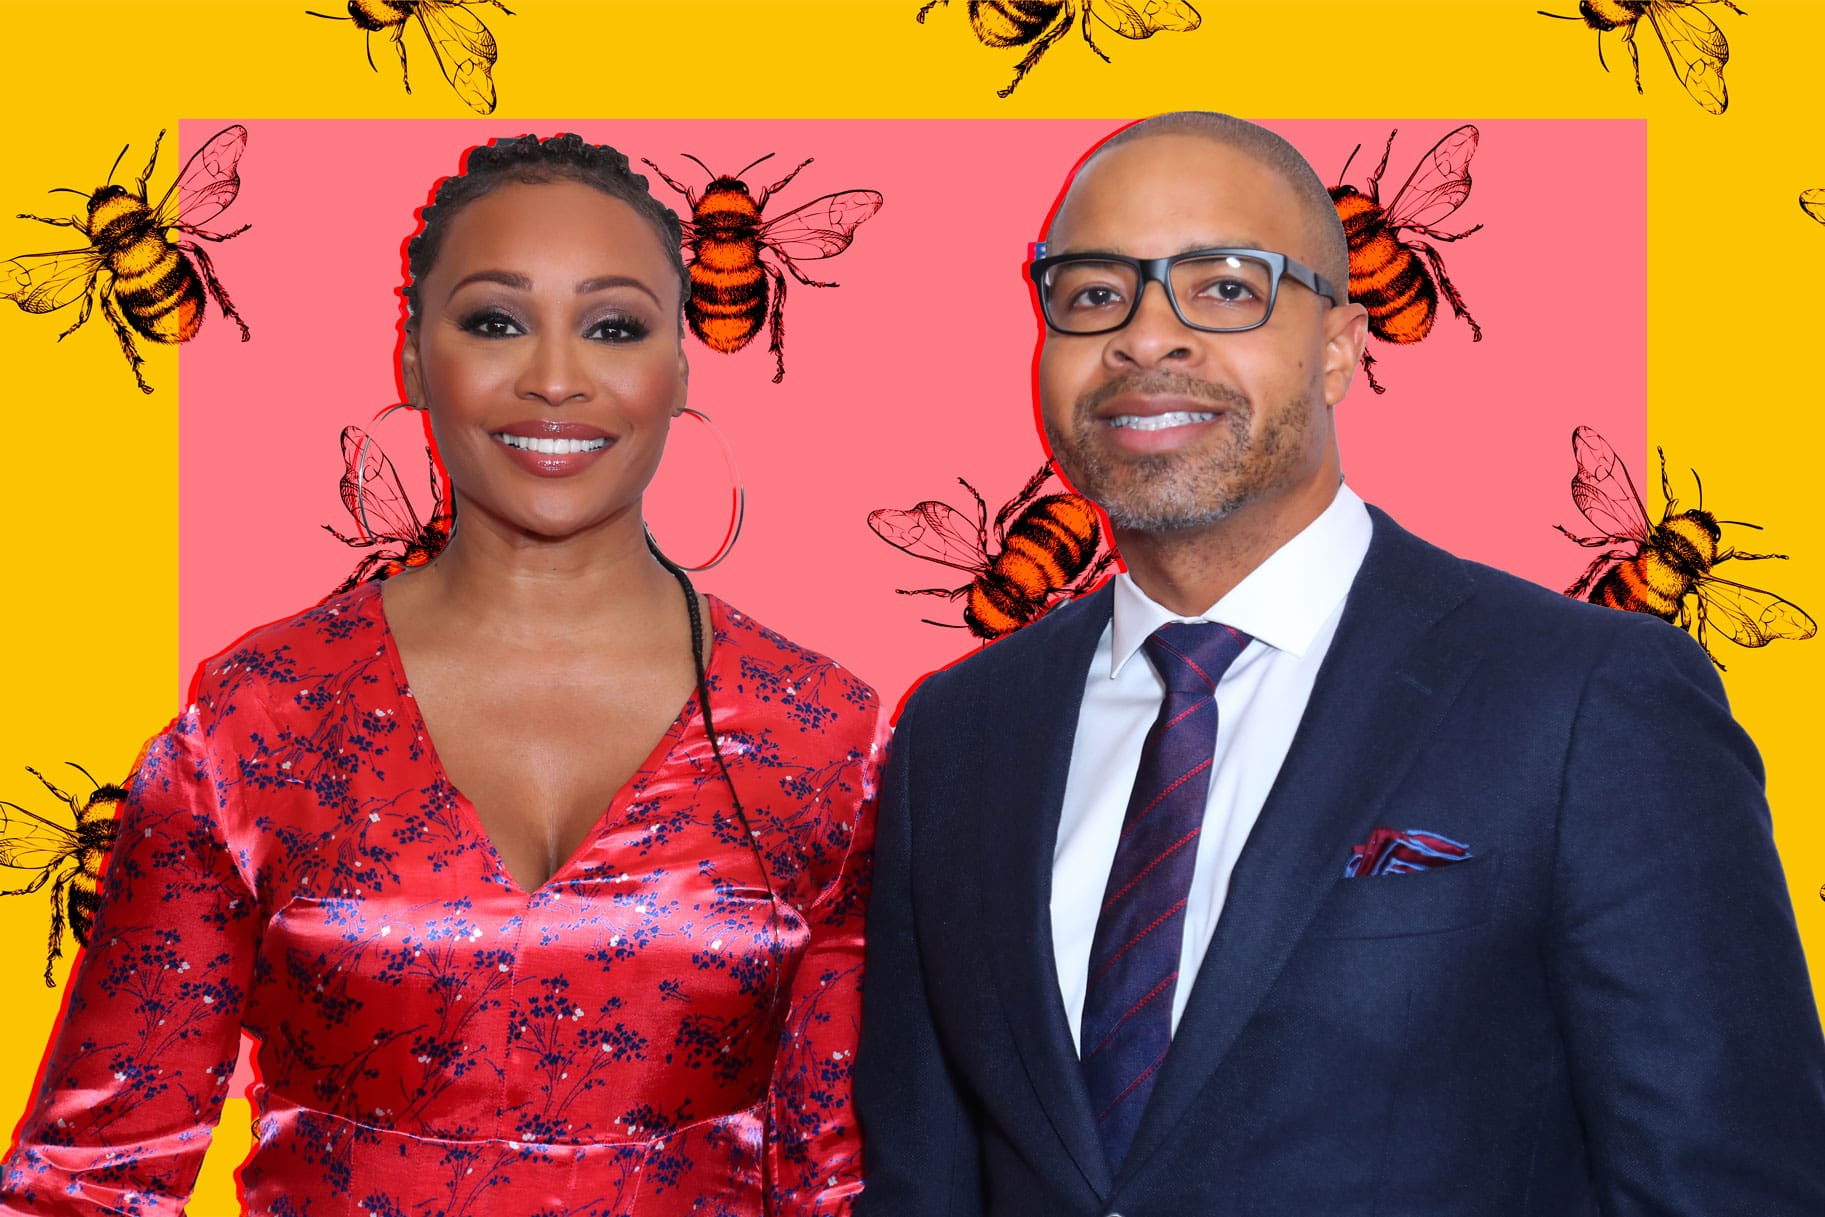 Cynthia Bailey's Latest Photos With Mike Hill Have Fans Talking About Her Wedding Dress